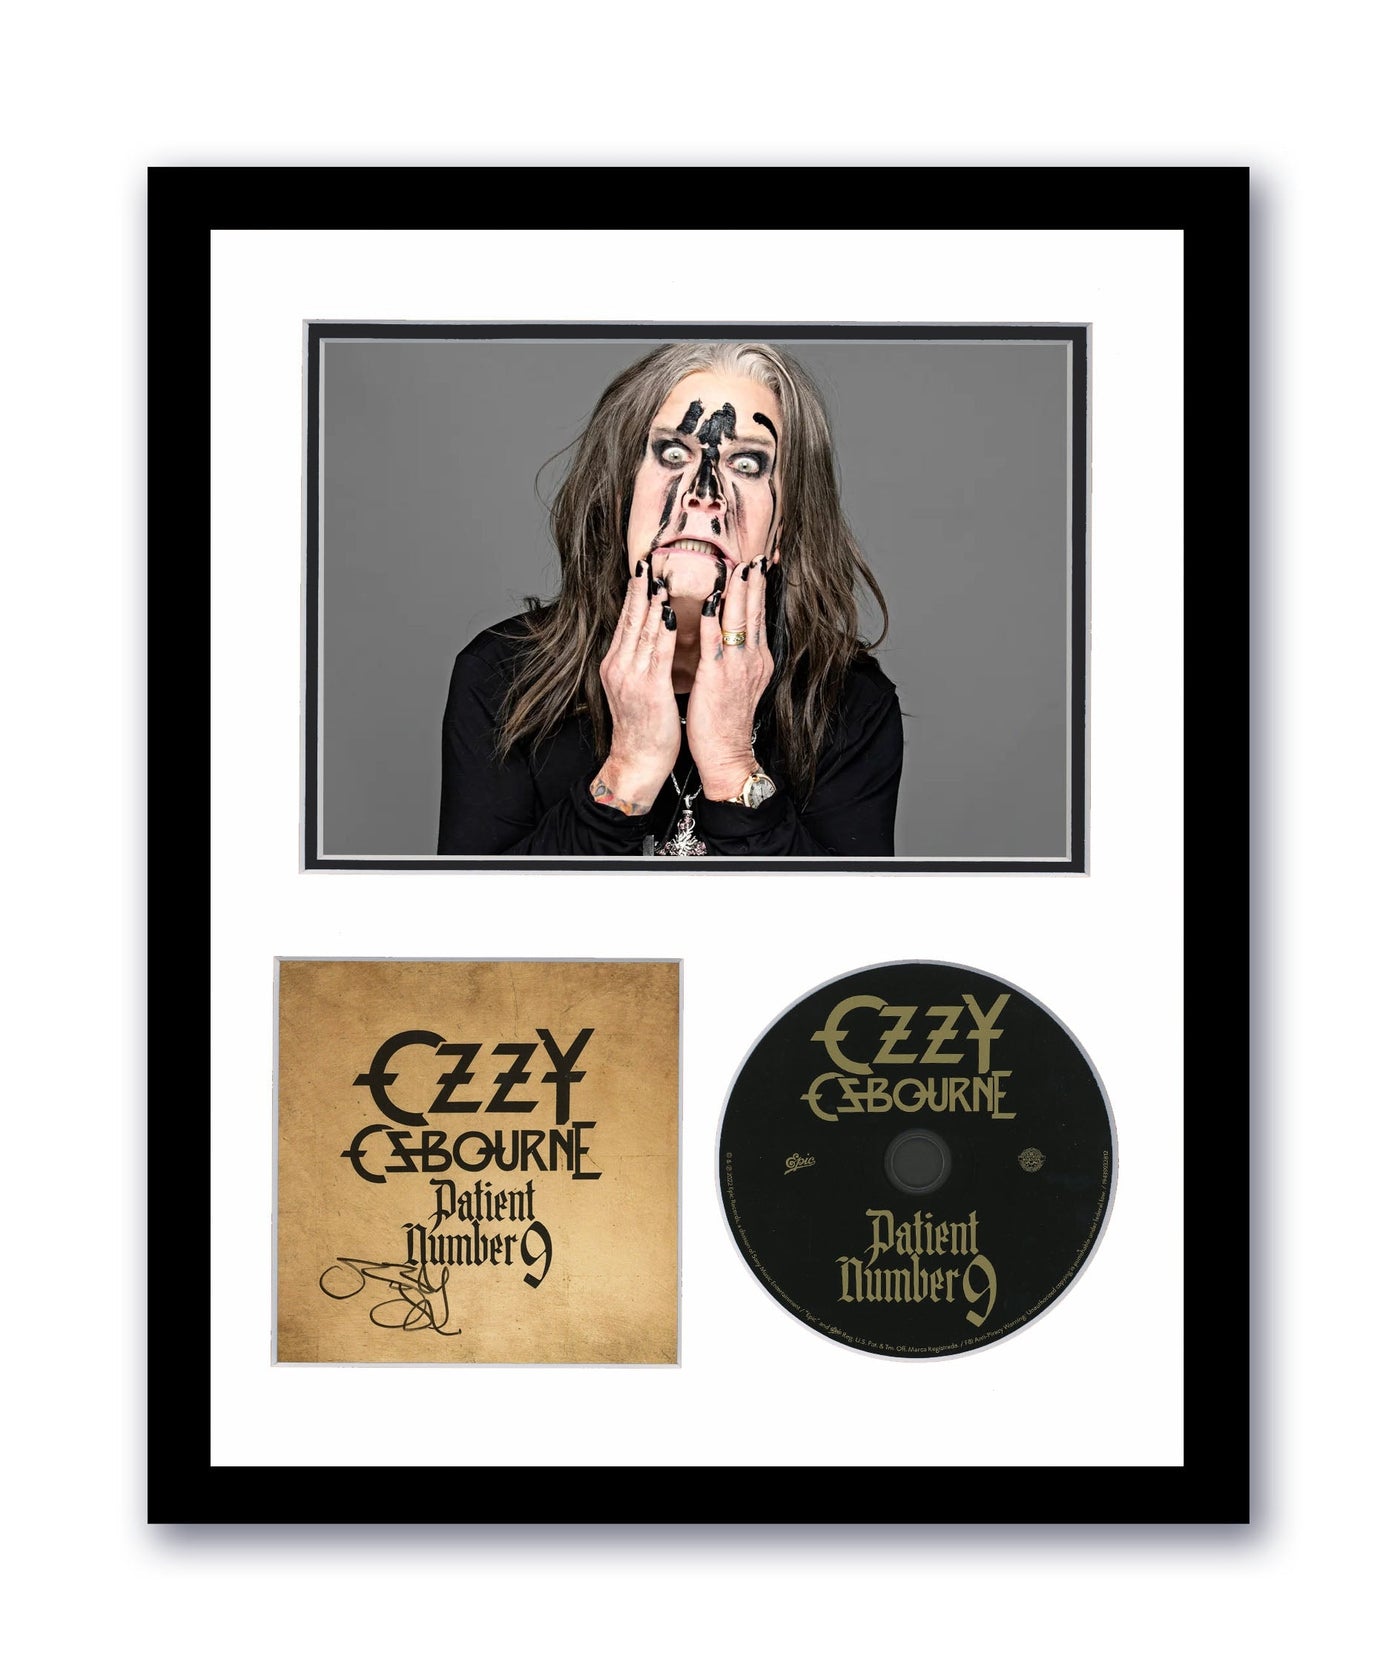 Ozzy Osbourne Autographed 11x14 Framed CD Photo Patient Number 9 ACOA 2